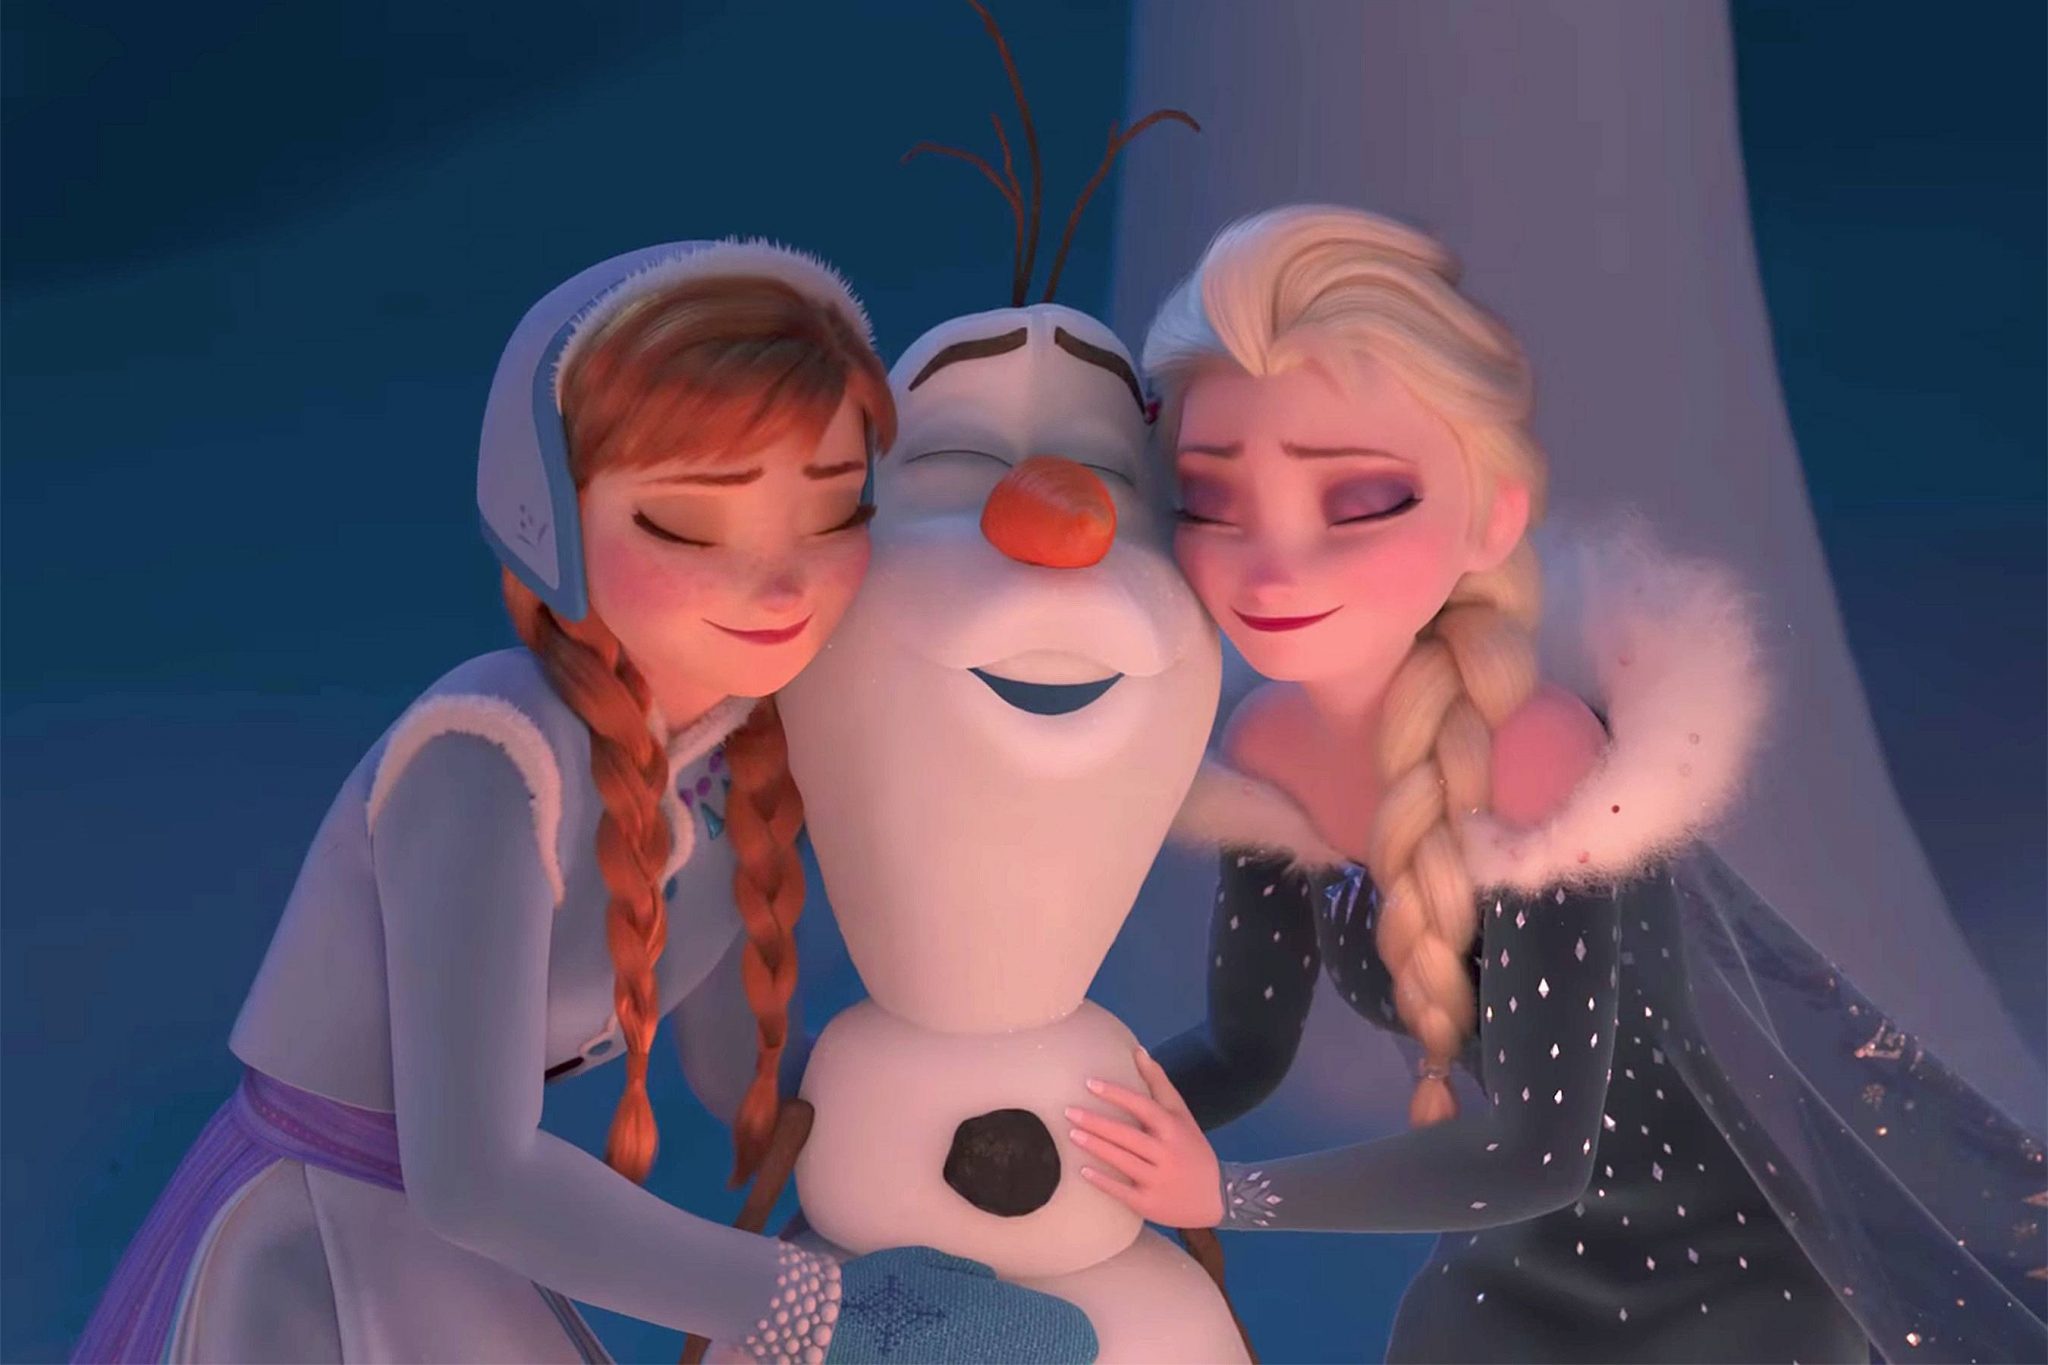 Four Original Songs Featured in New Animated Featurette “OLAF’S FROZEN ADVENTURE!”